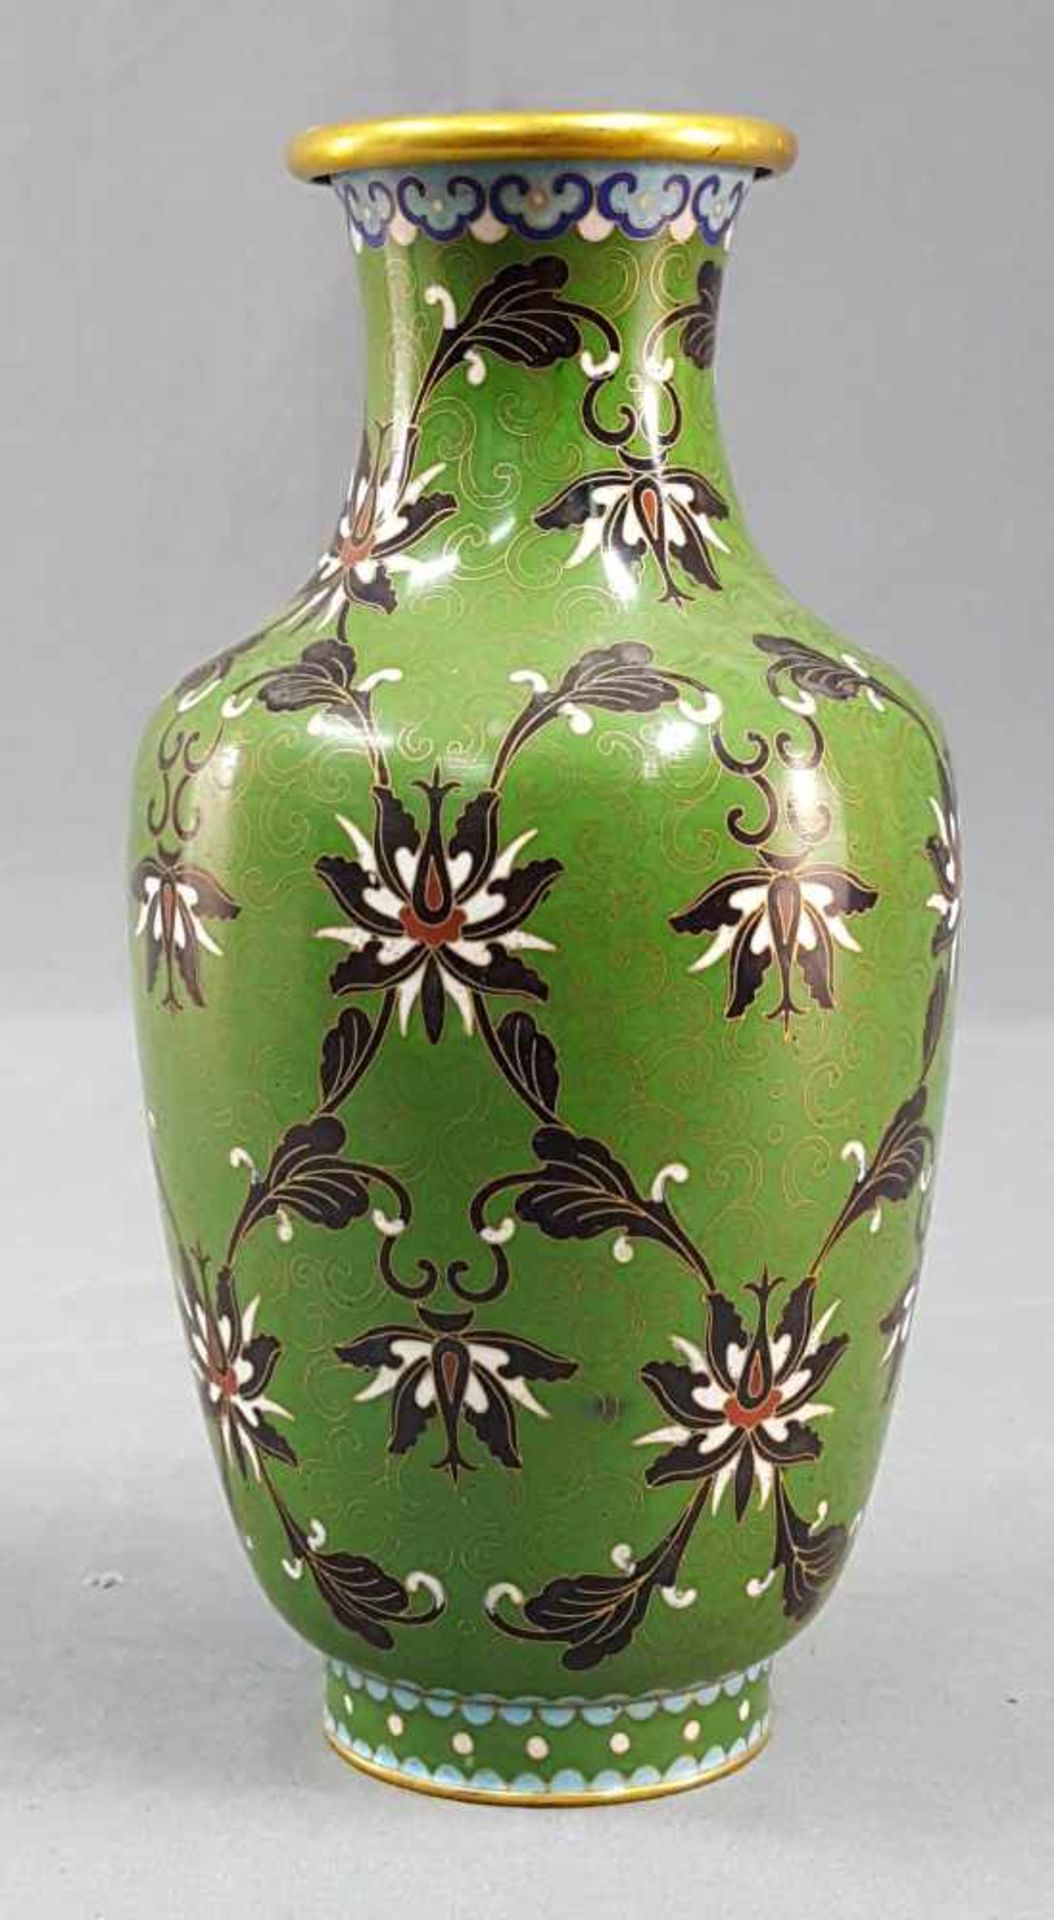 Green Cloisonne vase. Proably China old, around 1920.